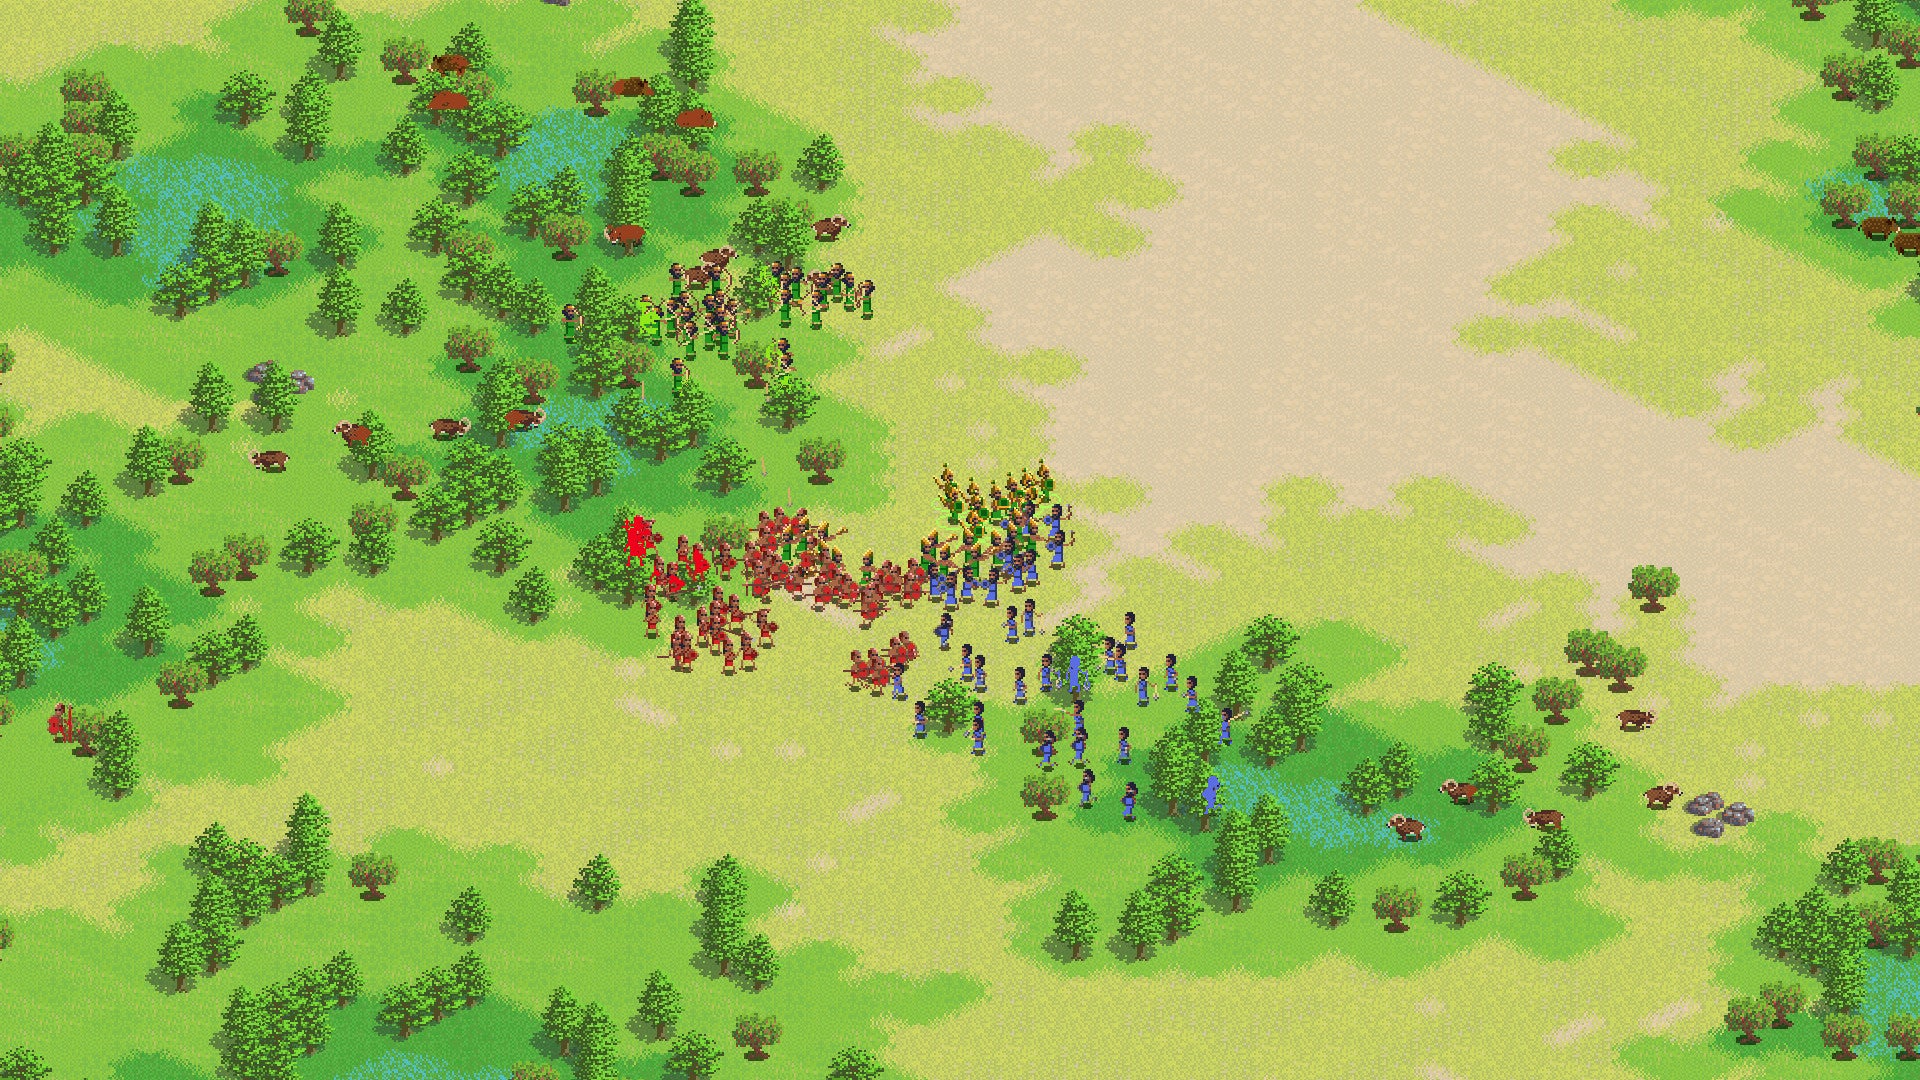 Two tiny armies meeting in battle in The Fertile Crescent